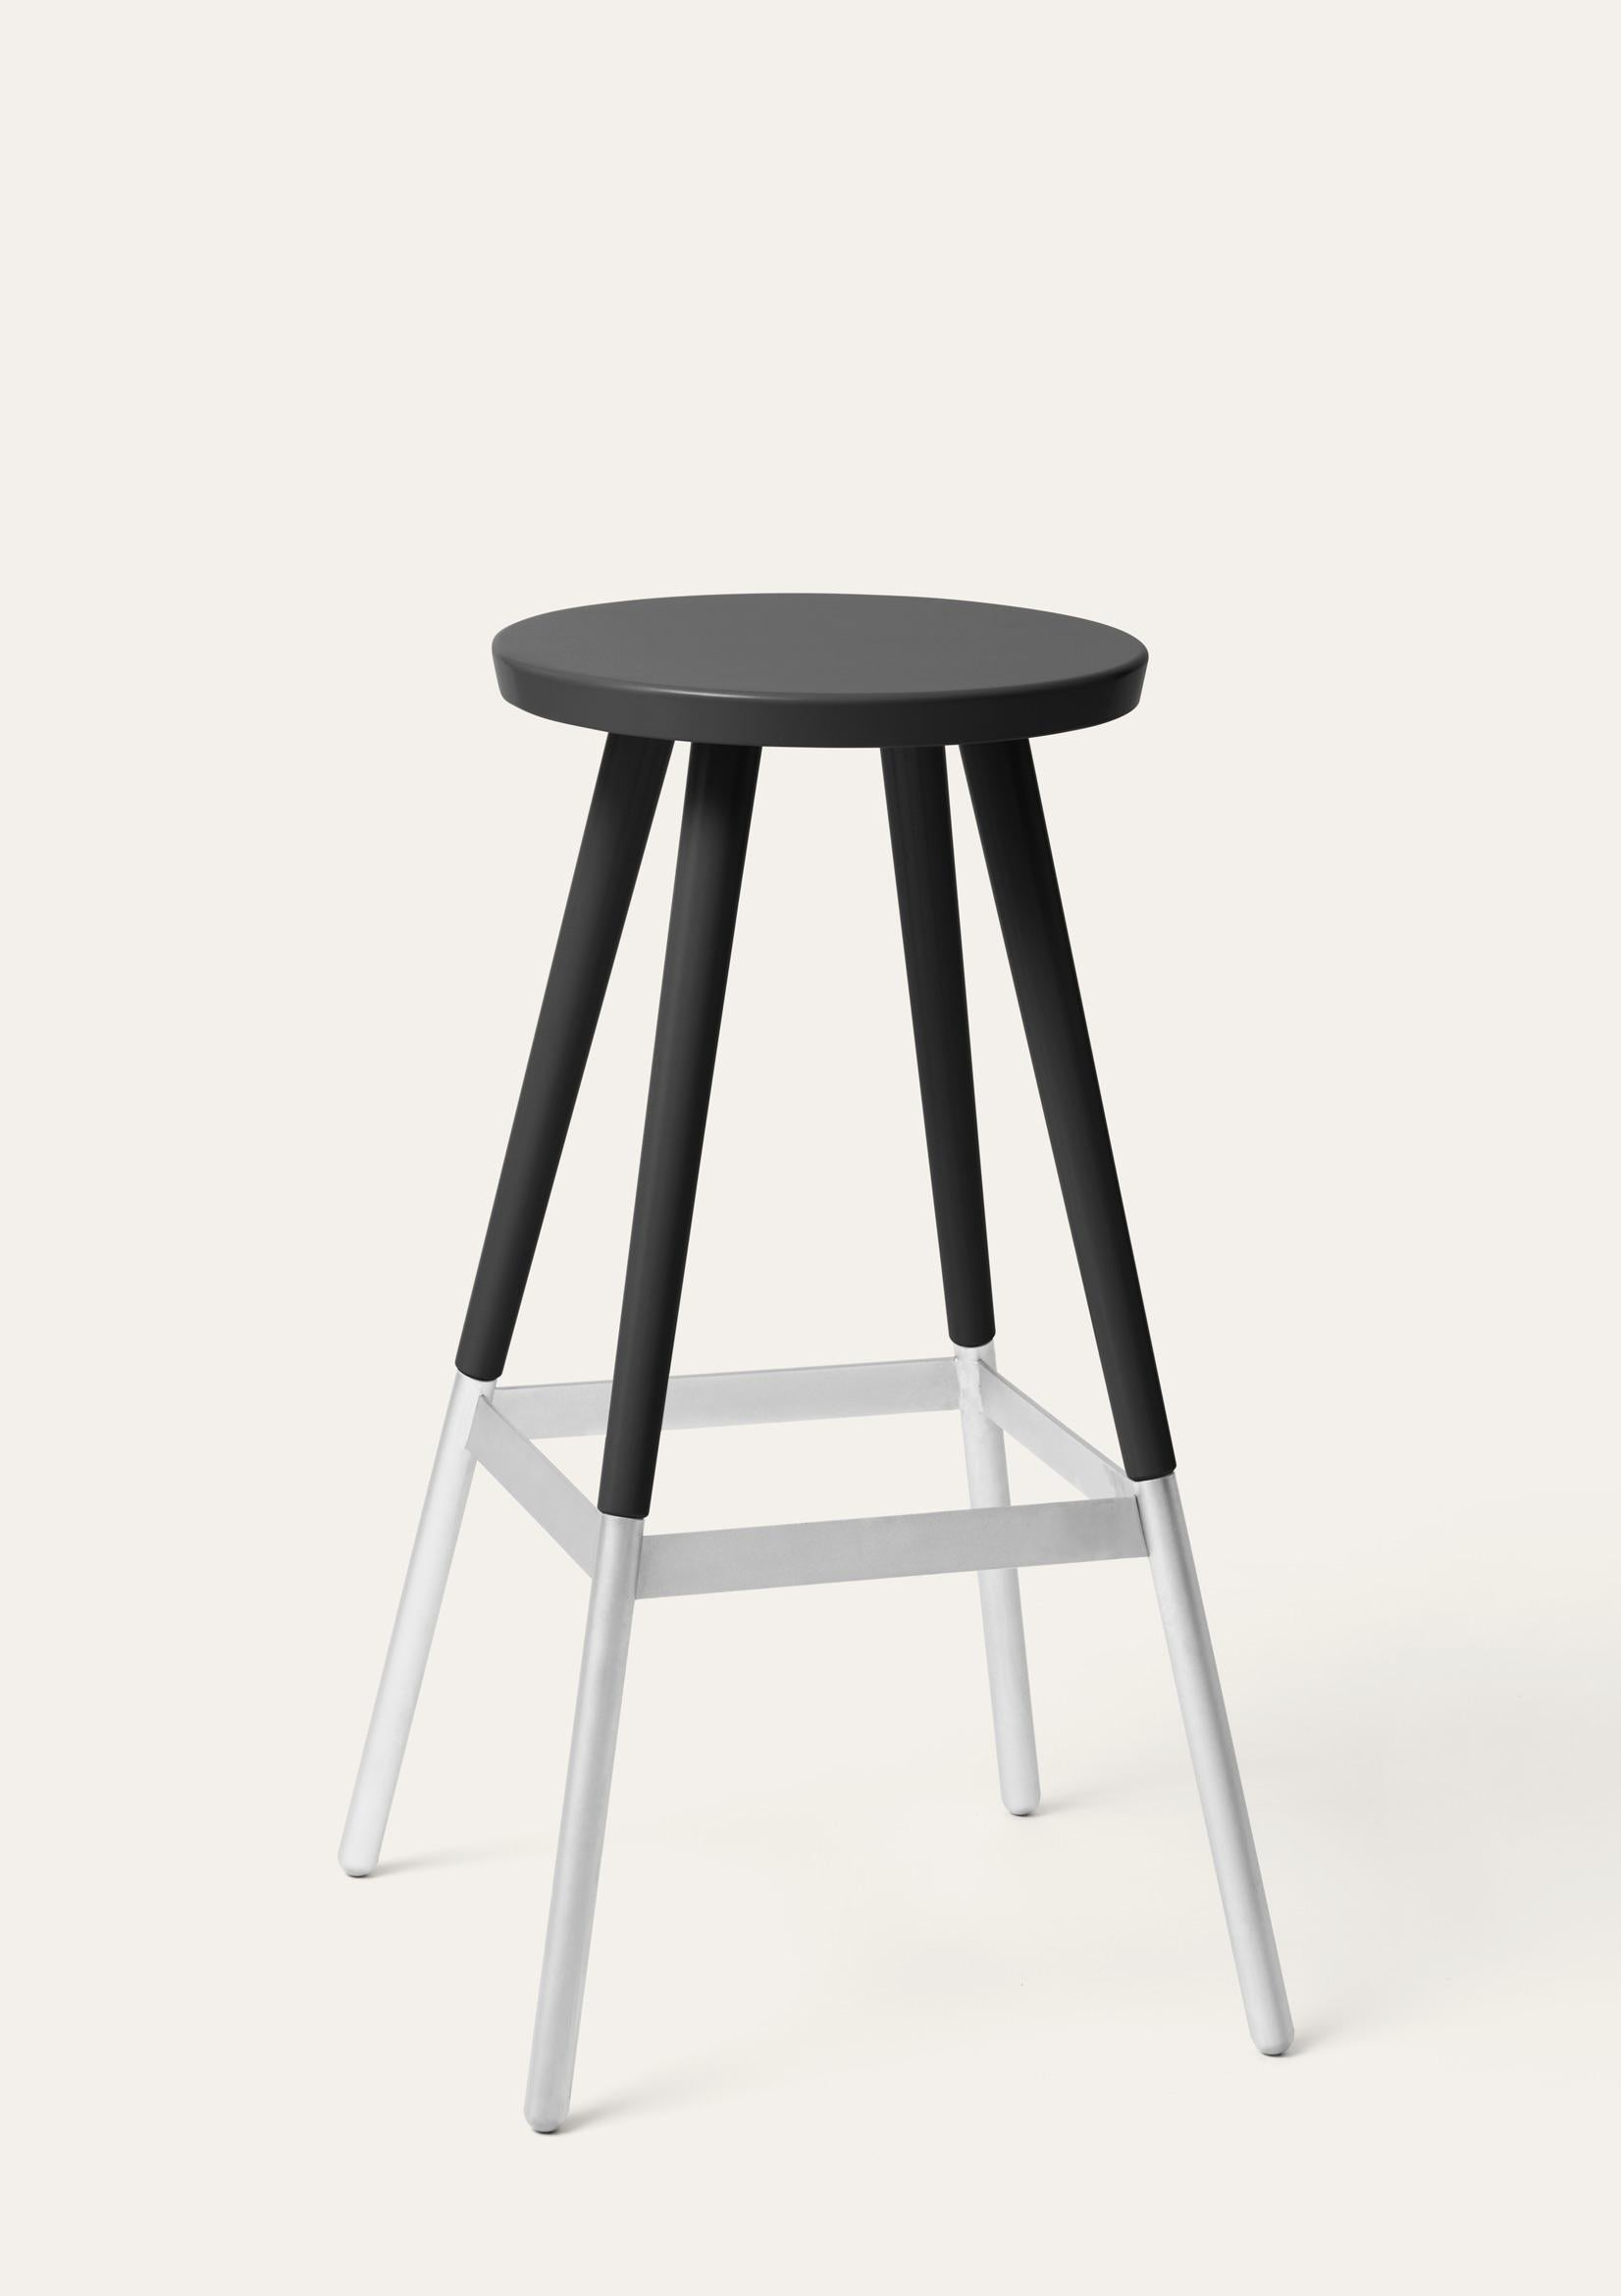 Large black Tupp stool by Storängen Design
Dimensions: D 45 x W 45 x H 82 cm
Materials: birch wood, nickel plated steel.
Also available in other colors and with backrest.

Give the bar some character! Tupp is avaliable in two heights, both with